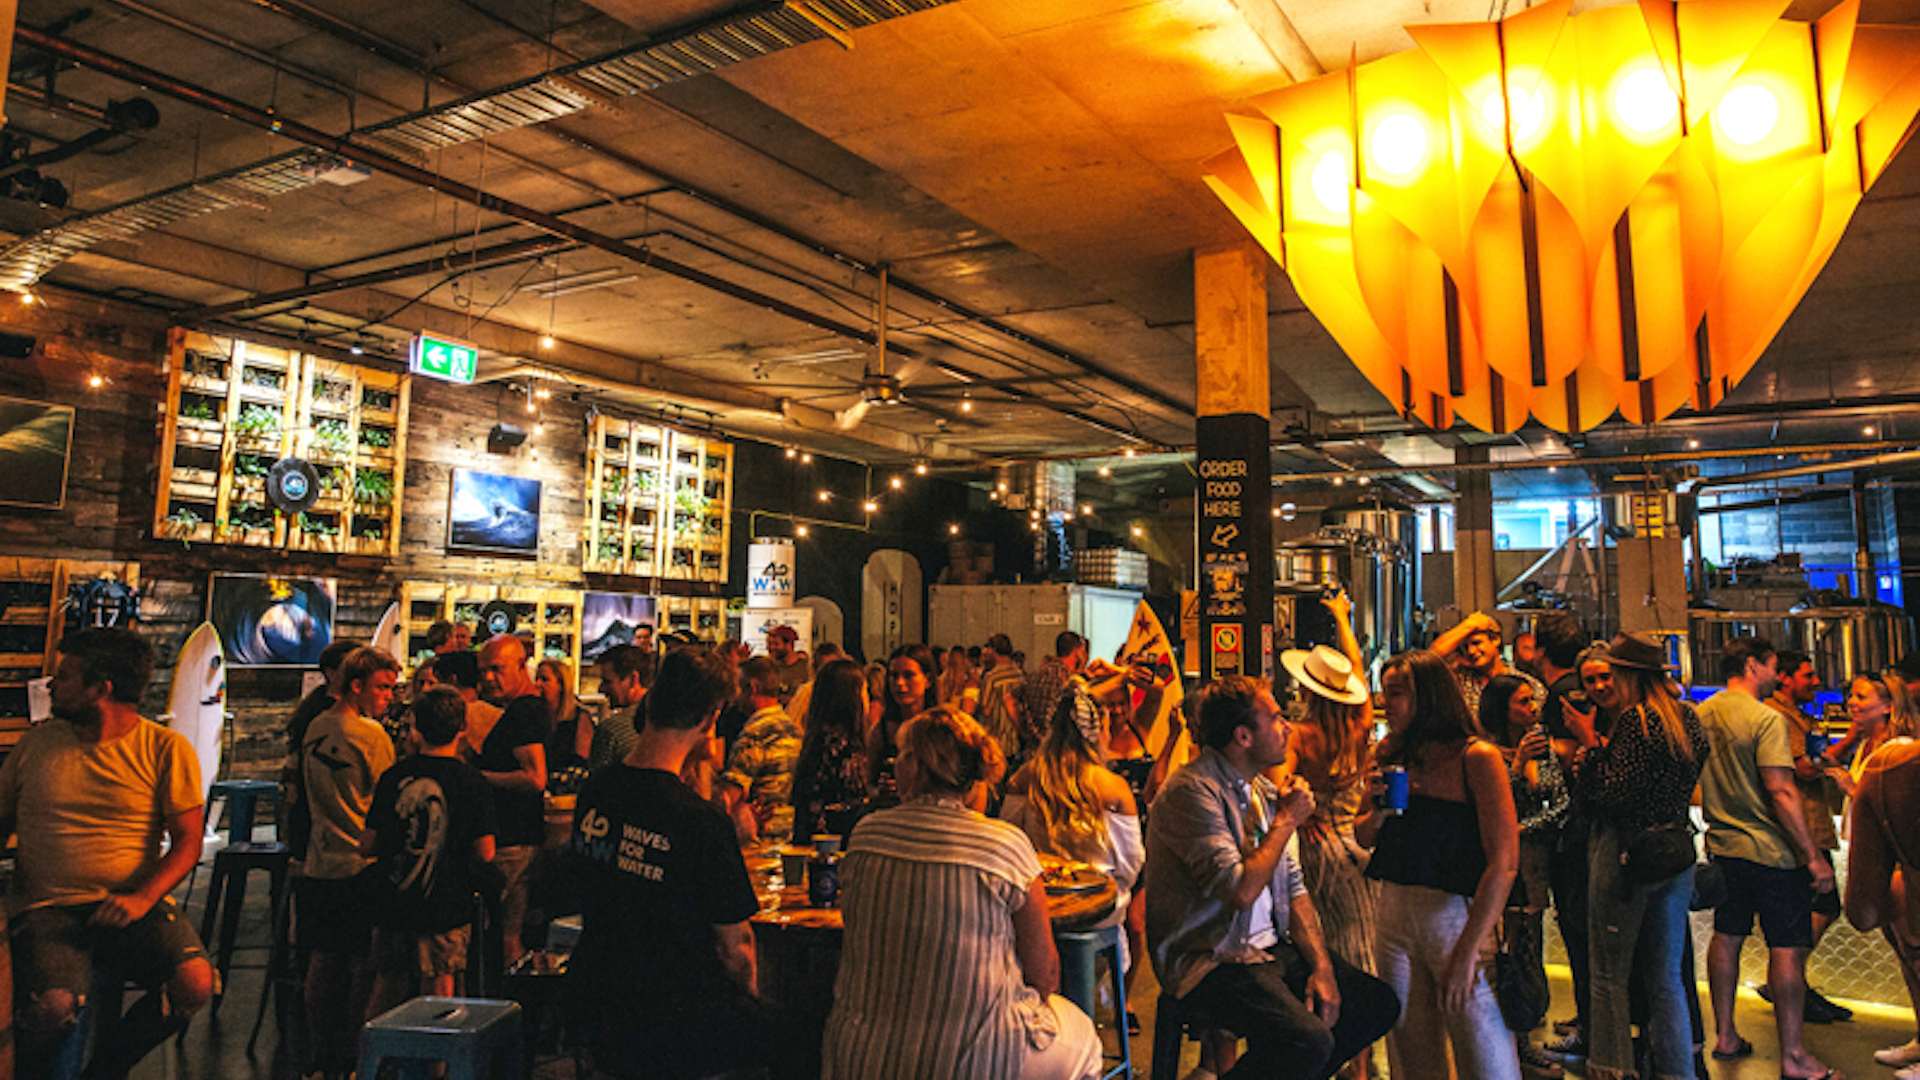 The busy bar at 7th Day Brewery in Sydney.